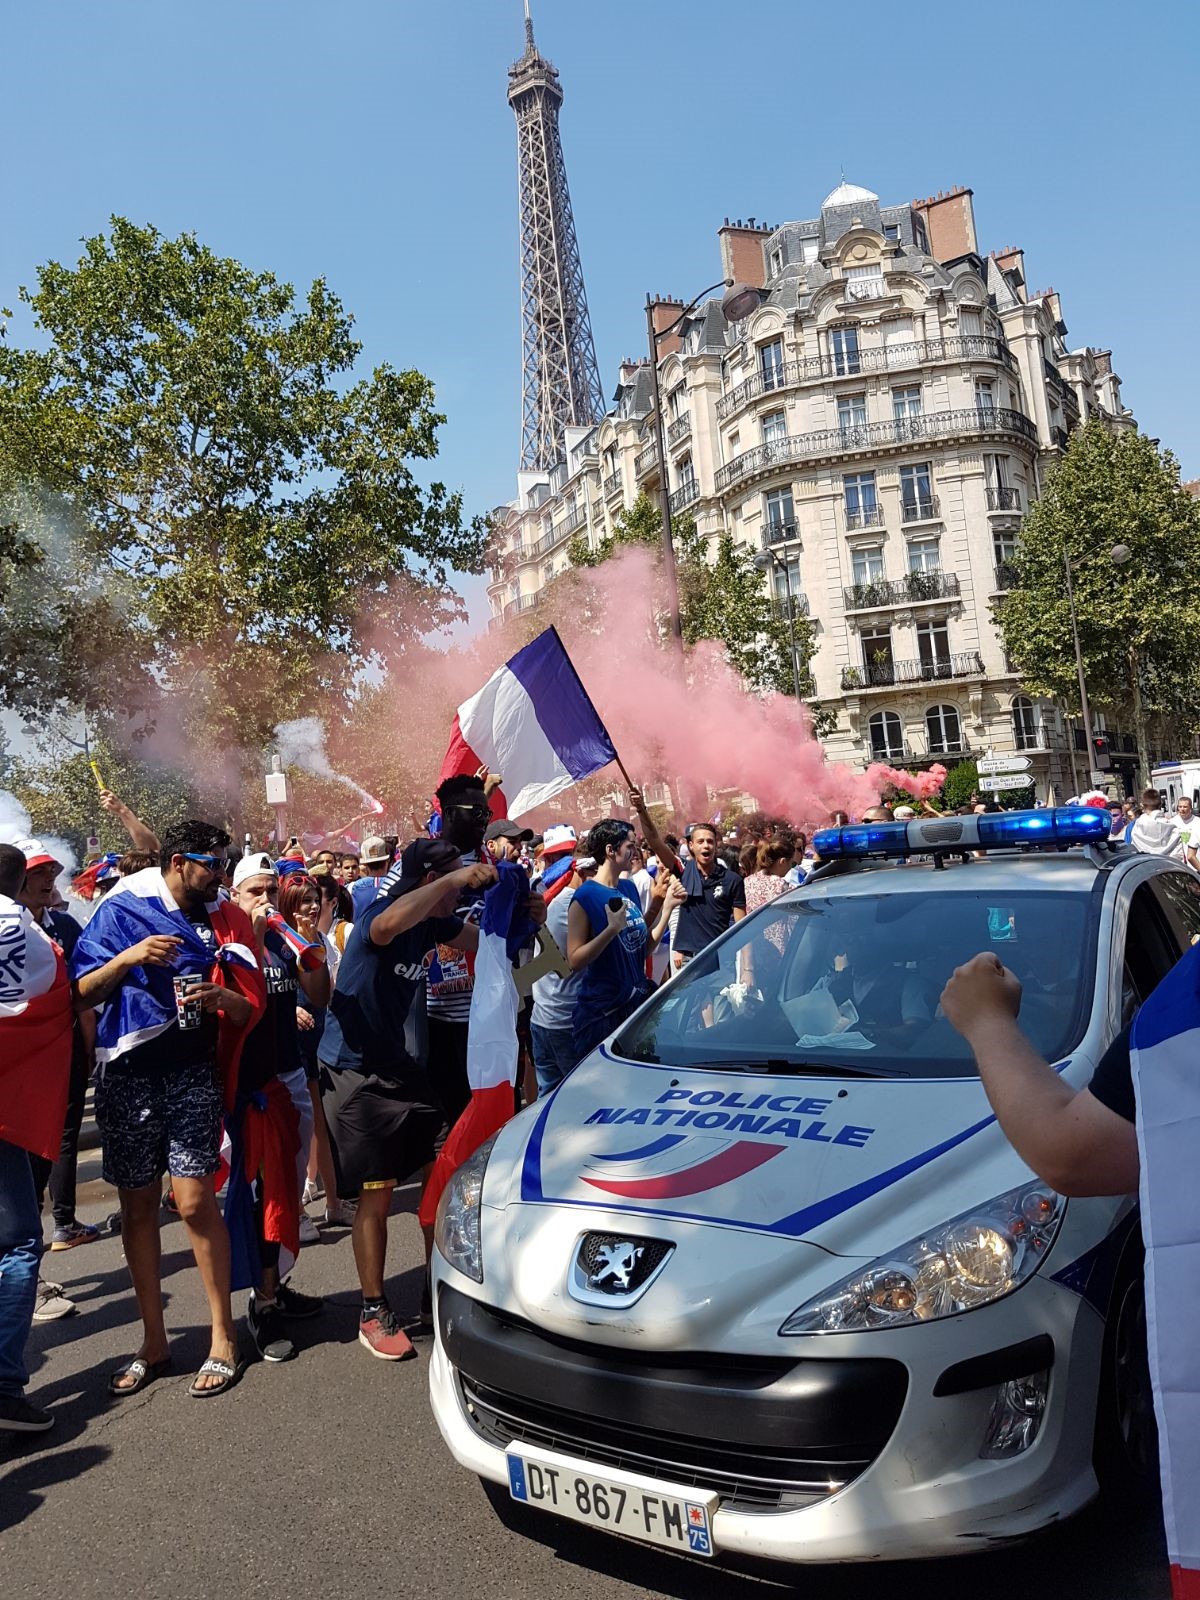 French security forces scattered around the streets of Paris to maintain the safety of people celebrating the World Cup finale today